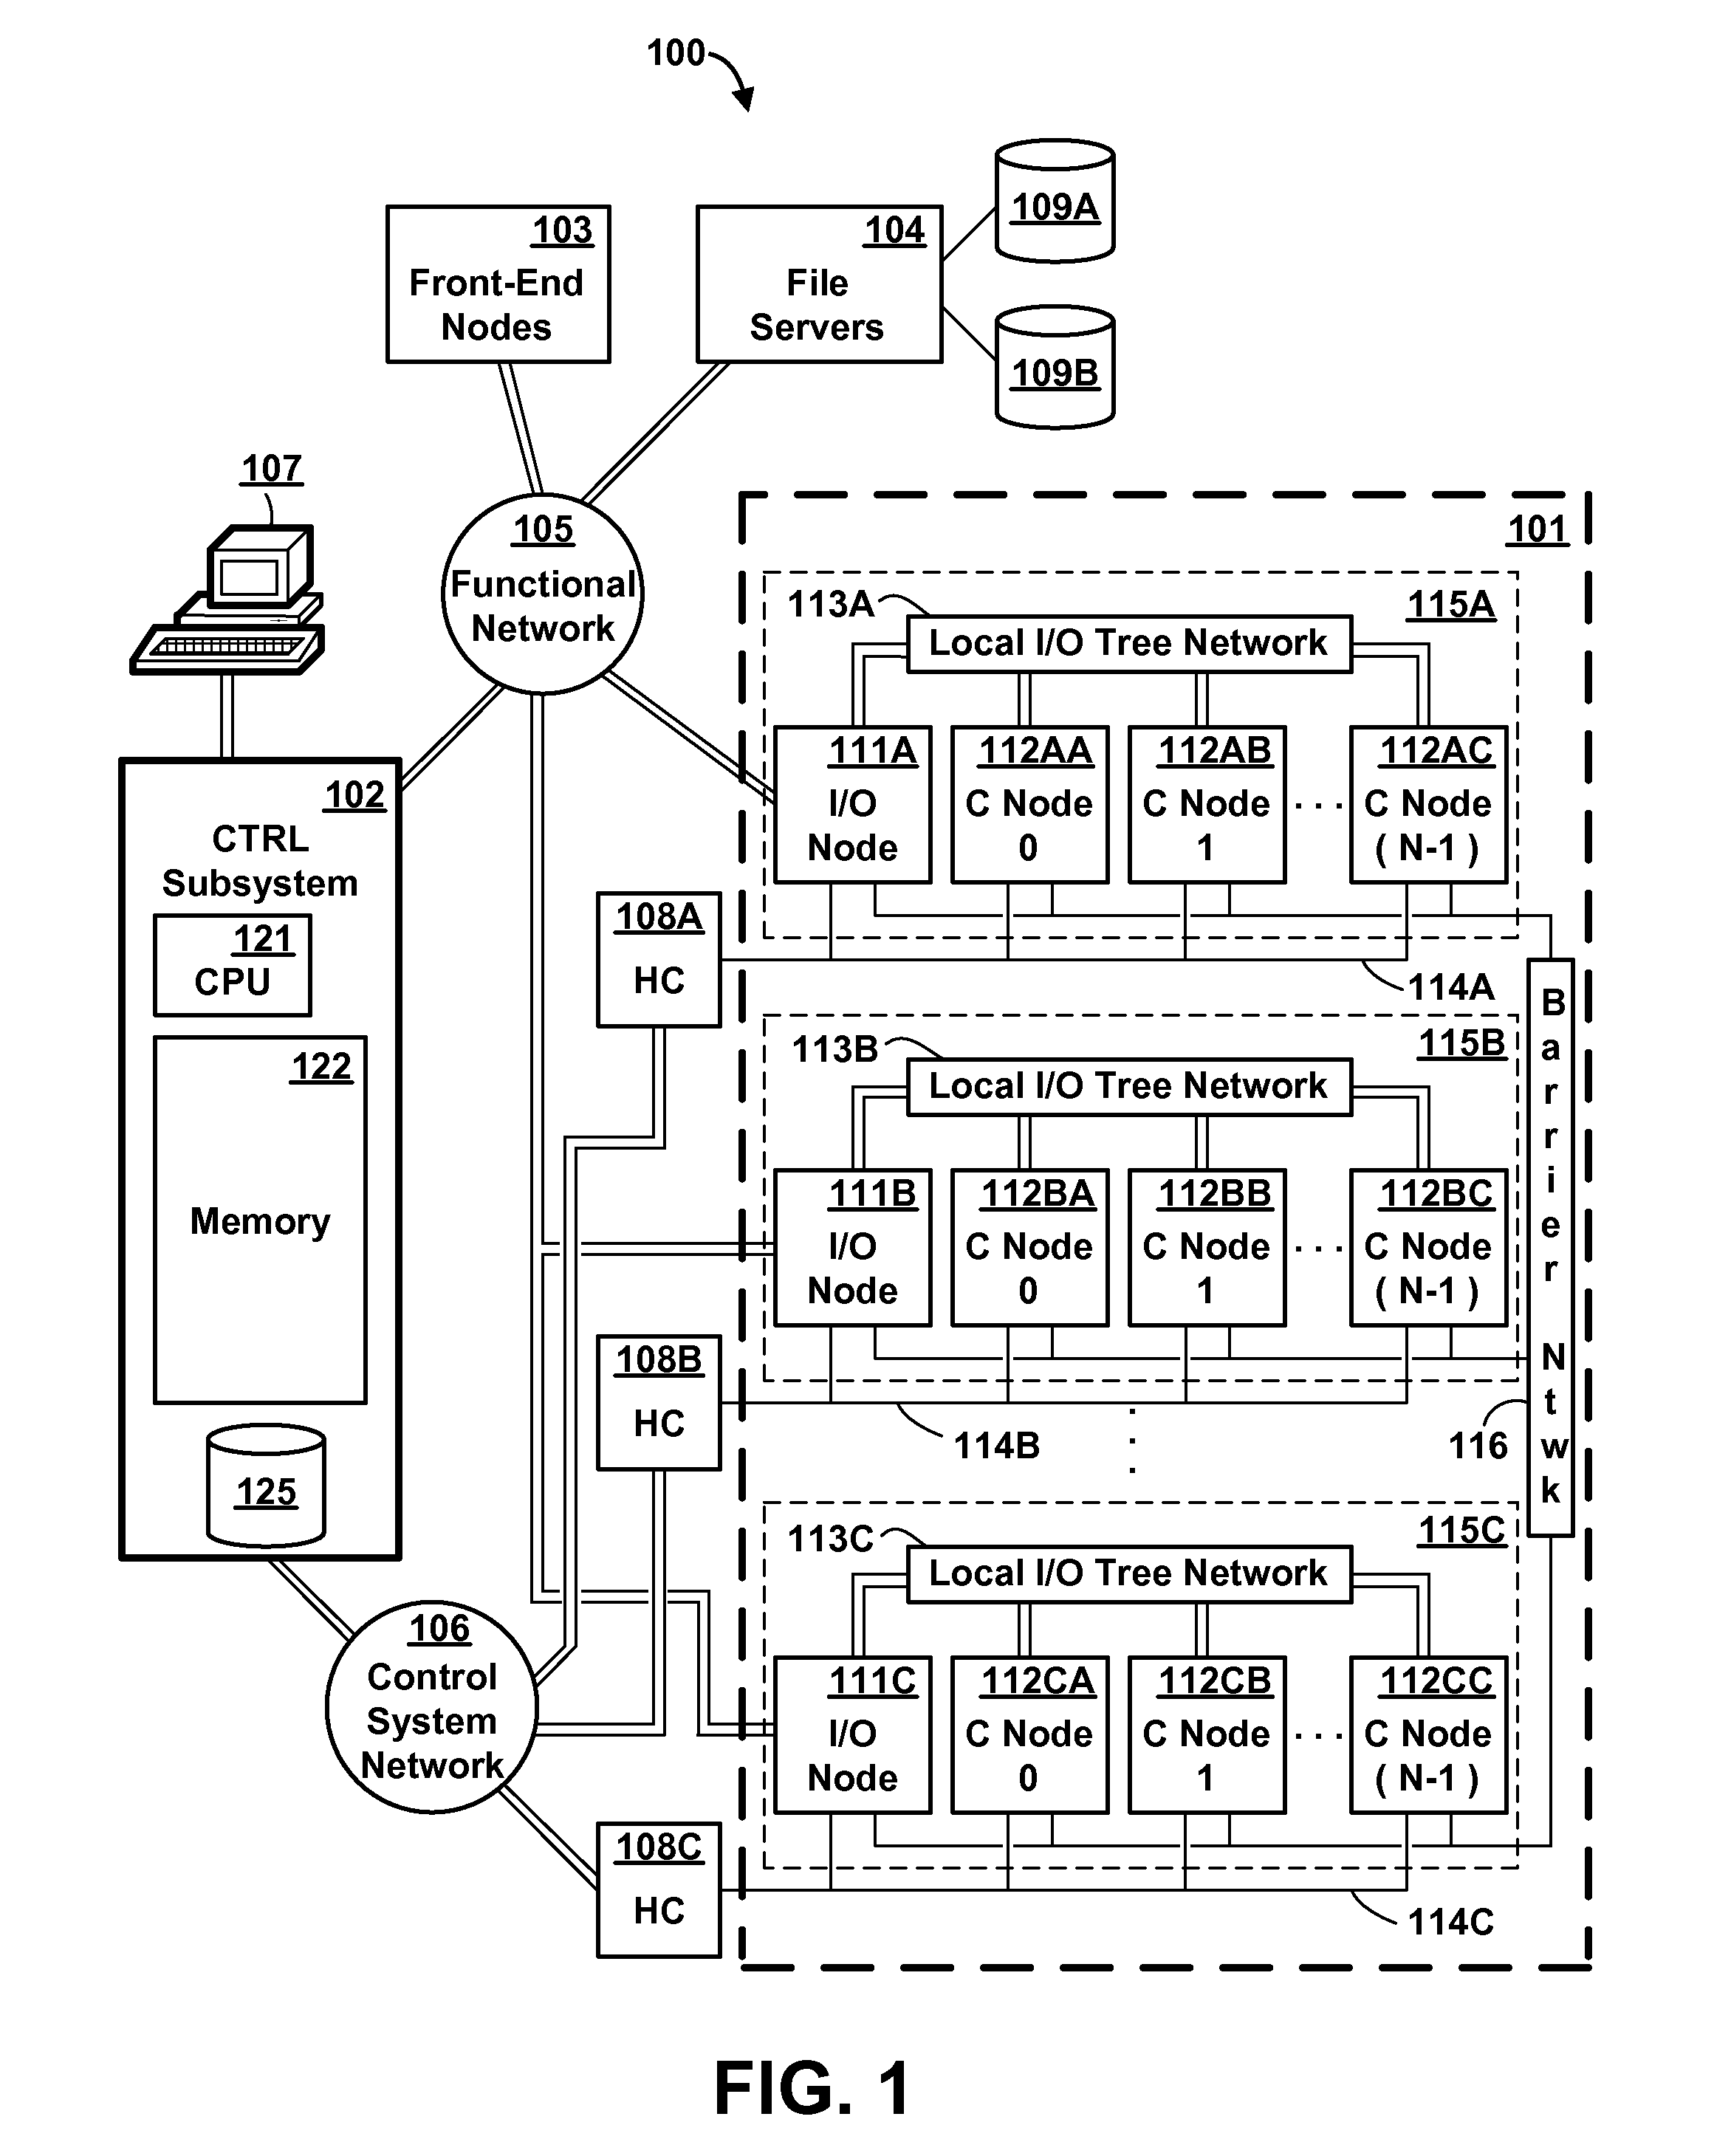 Method and apparatus for routing data in an inter-nodal communications lattice of a massively parallel computer system by employing bandwidth shells at areas of overutilization